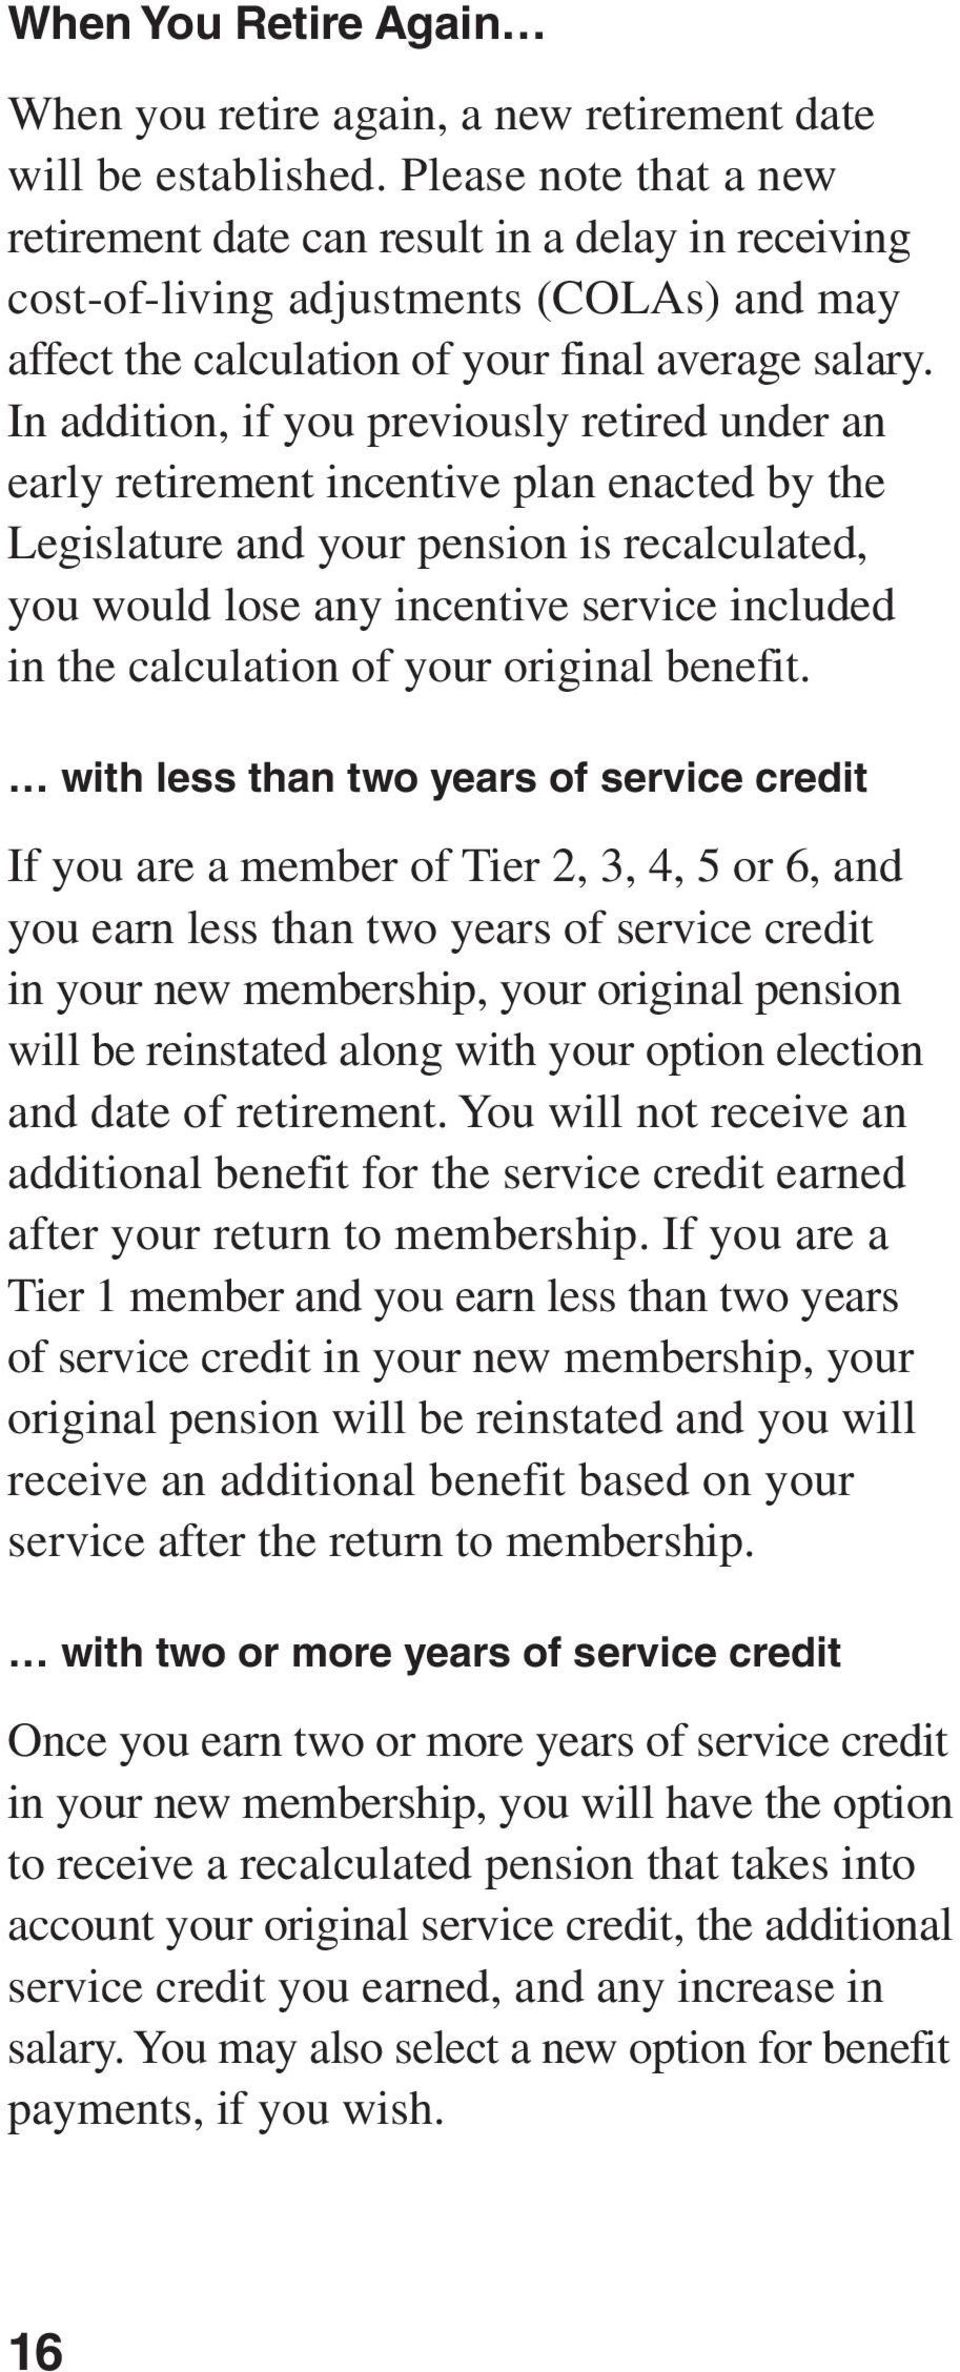 In addition, if you previously retired under an early retirement incentive plan enacted by the Legislature and your pension is recalculated, you would lose any incentive service included in the